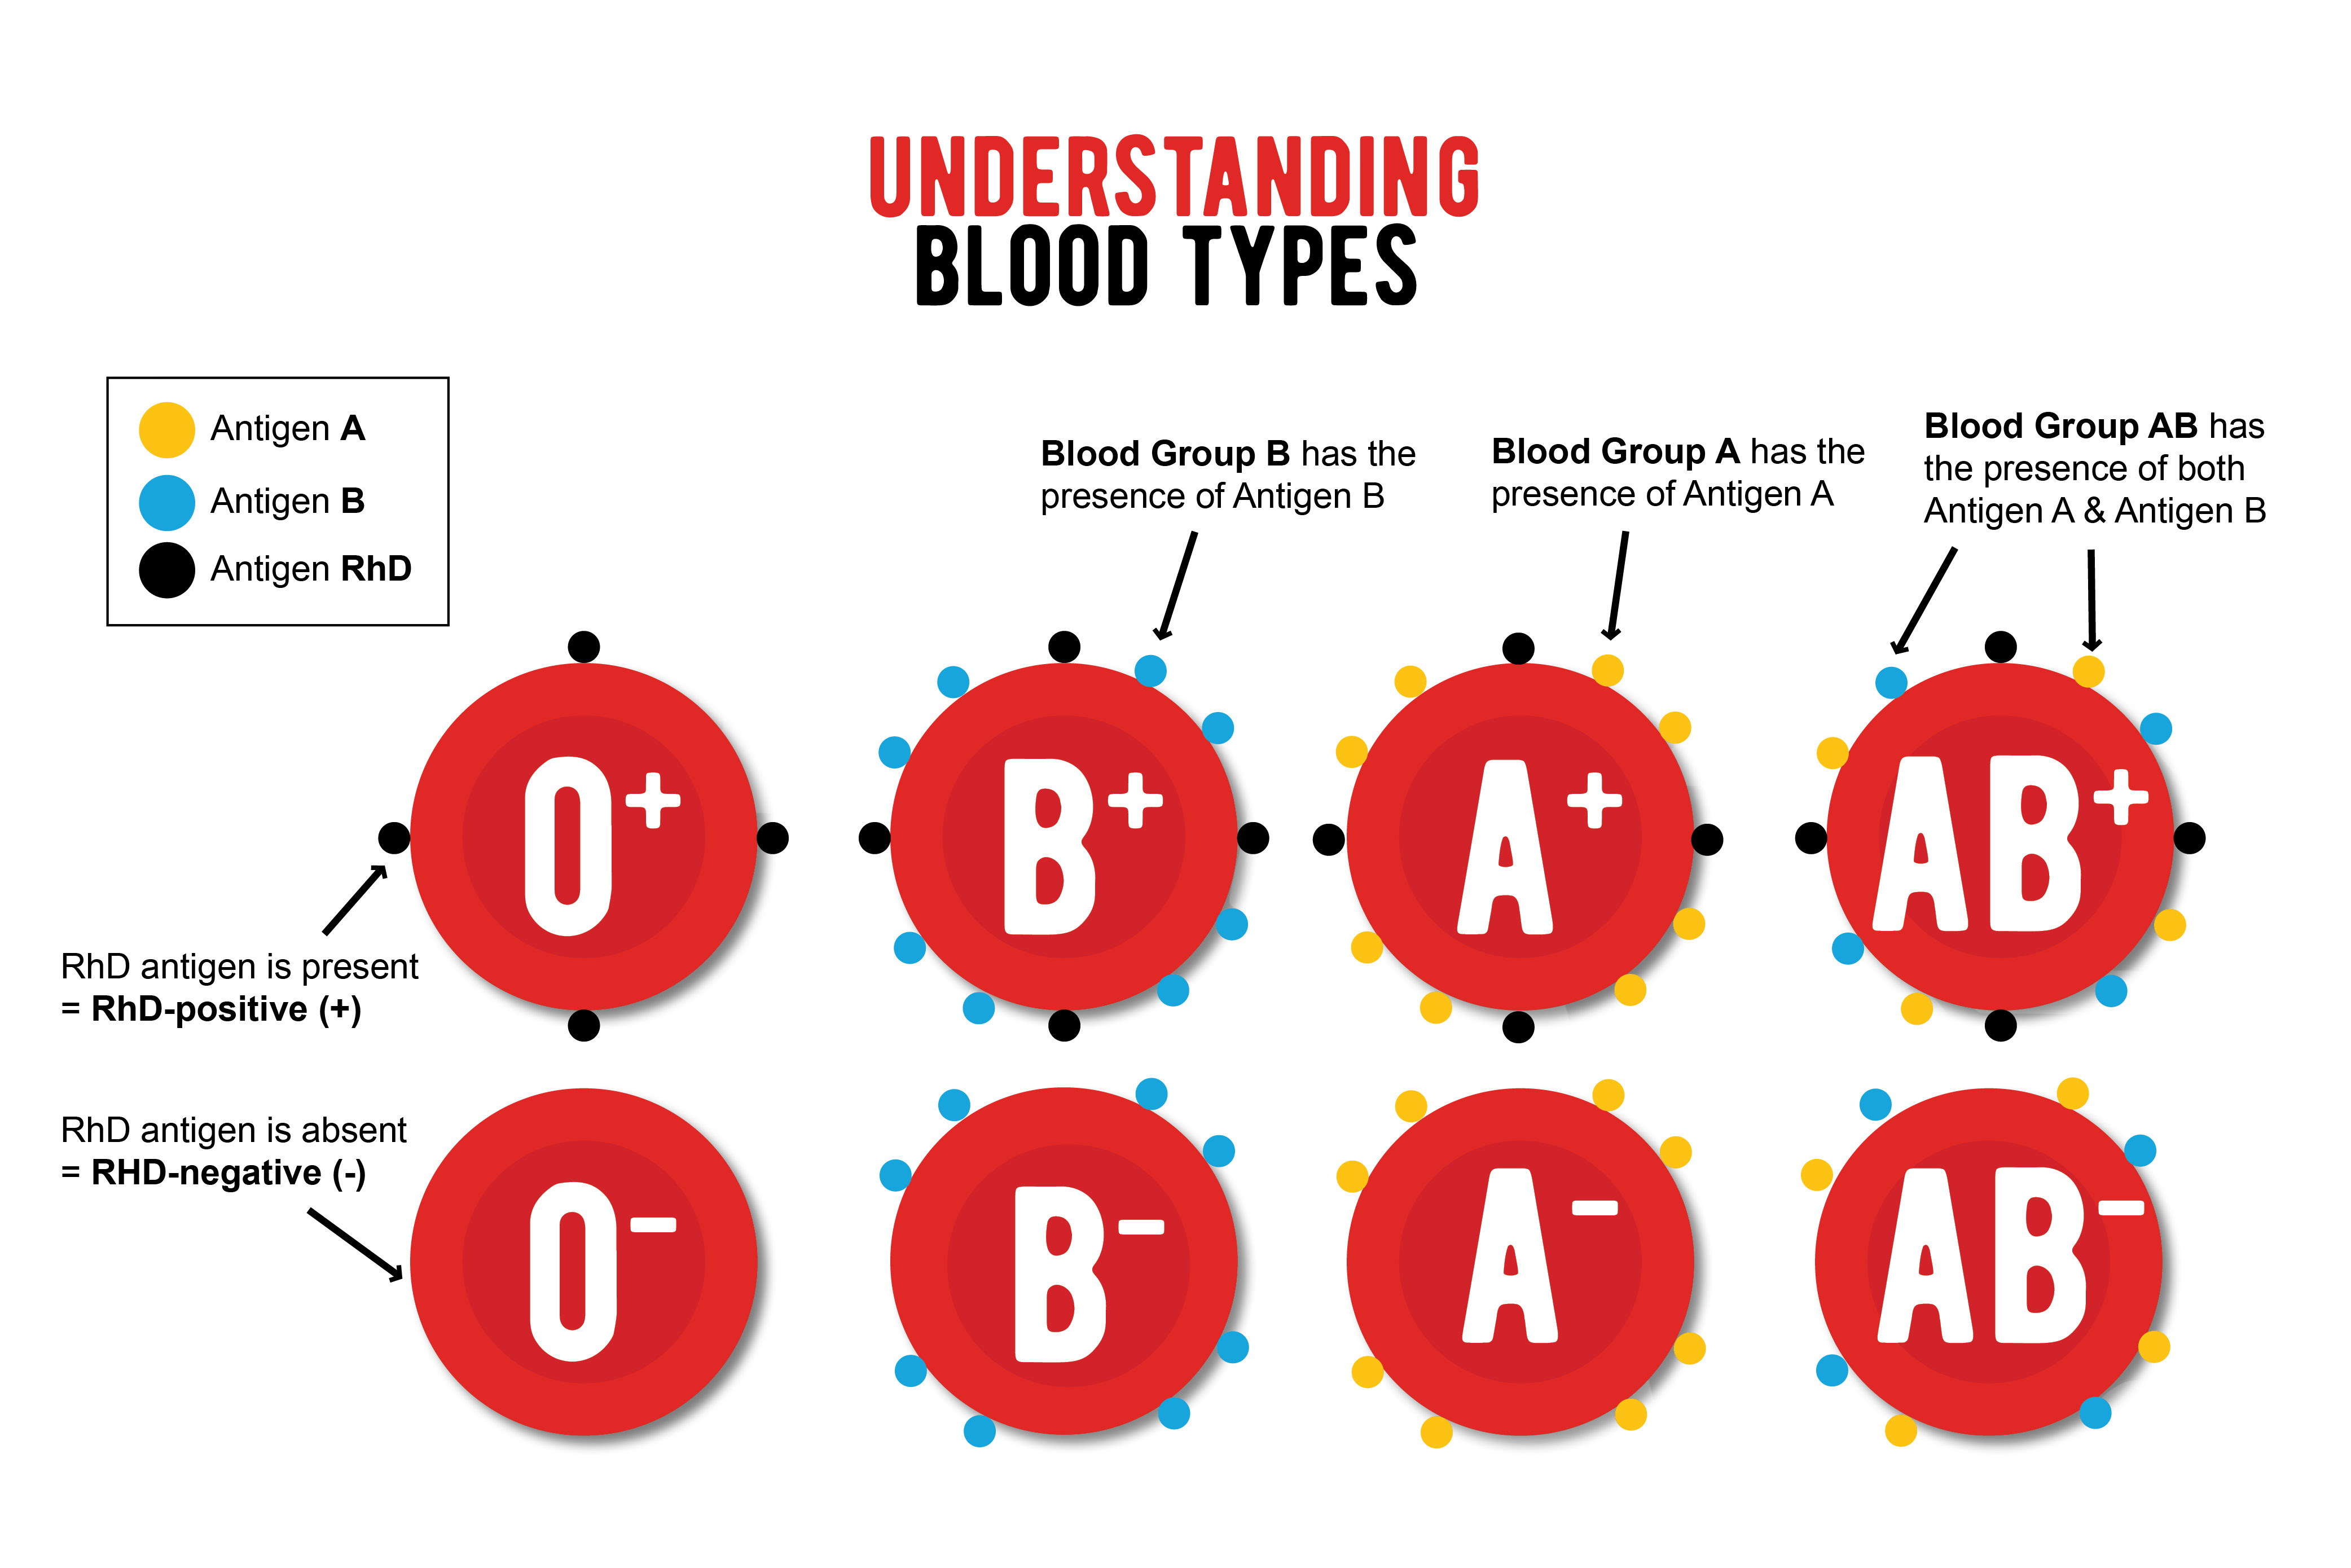 people with a negative blood type